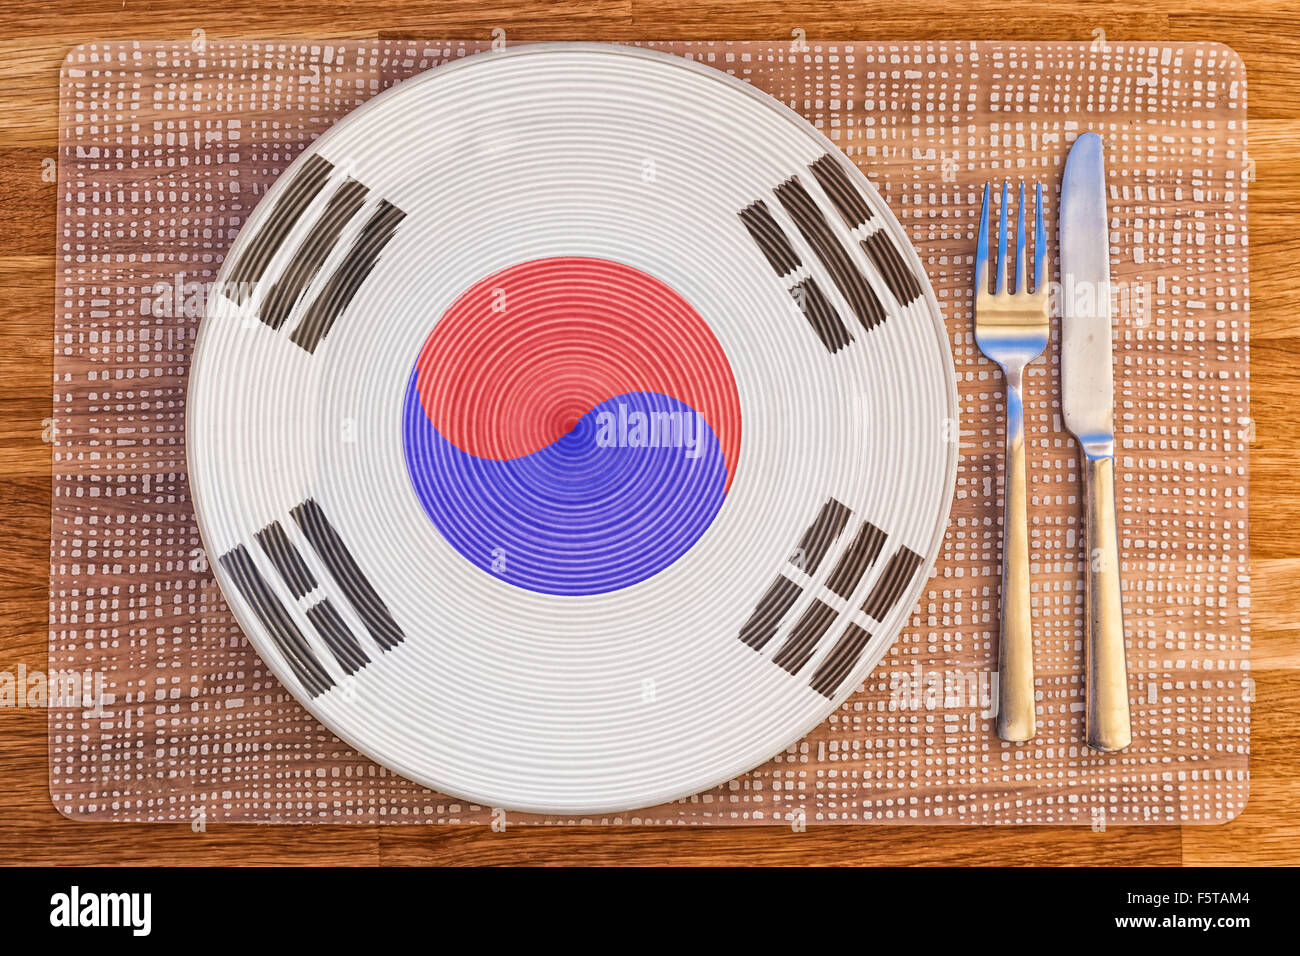 Dinner plate with the flag of South Korea on it for your international food and drink concepts. Stock Photo